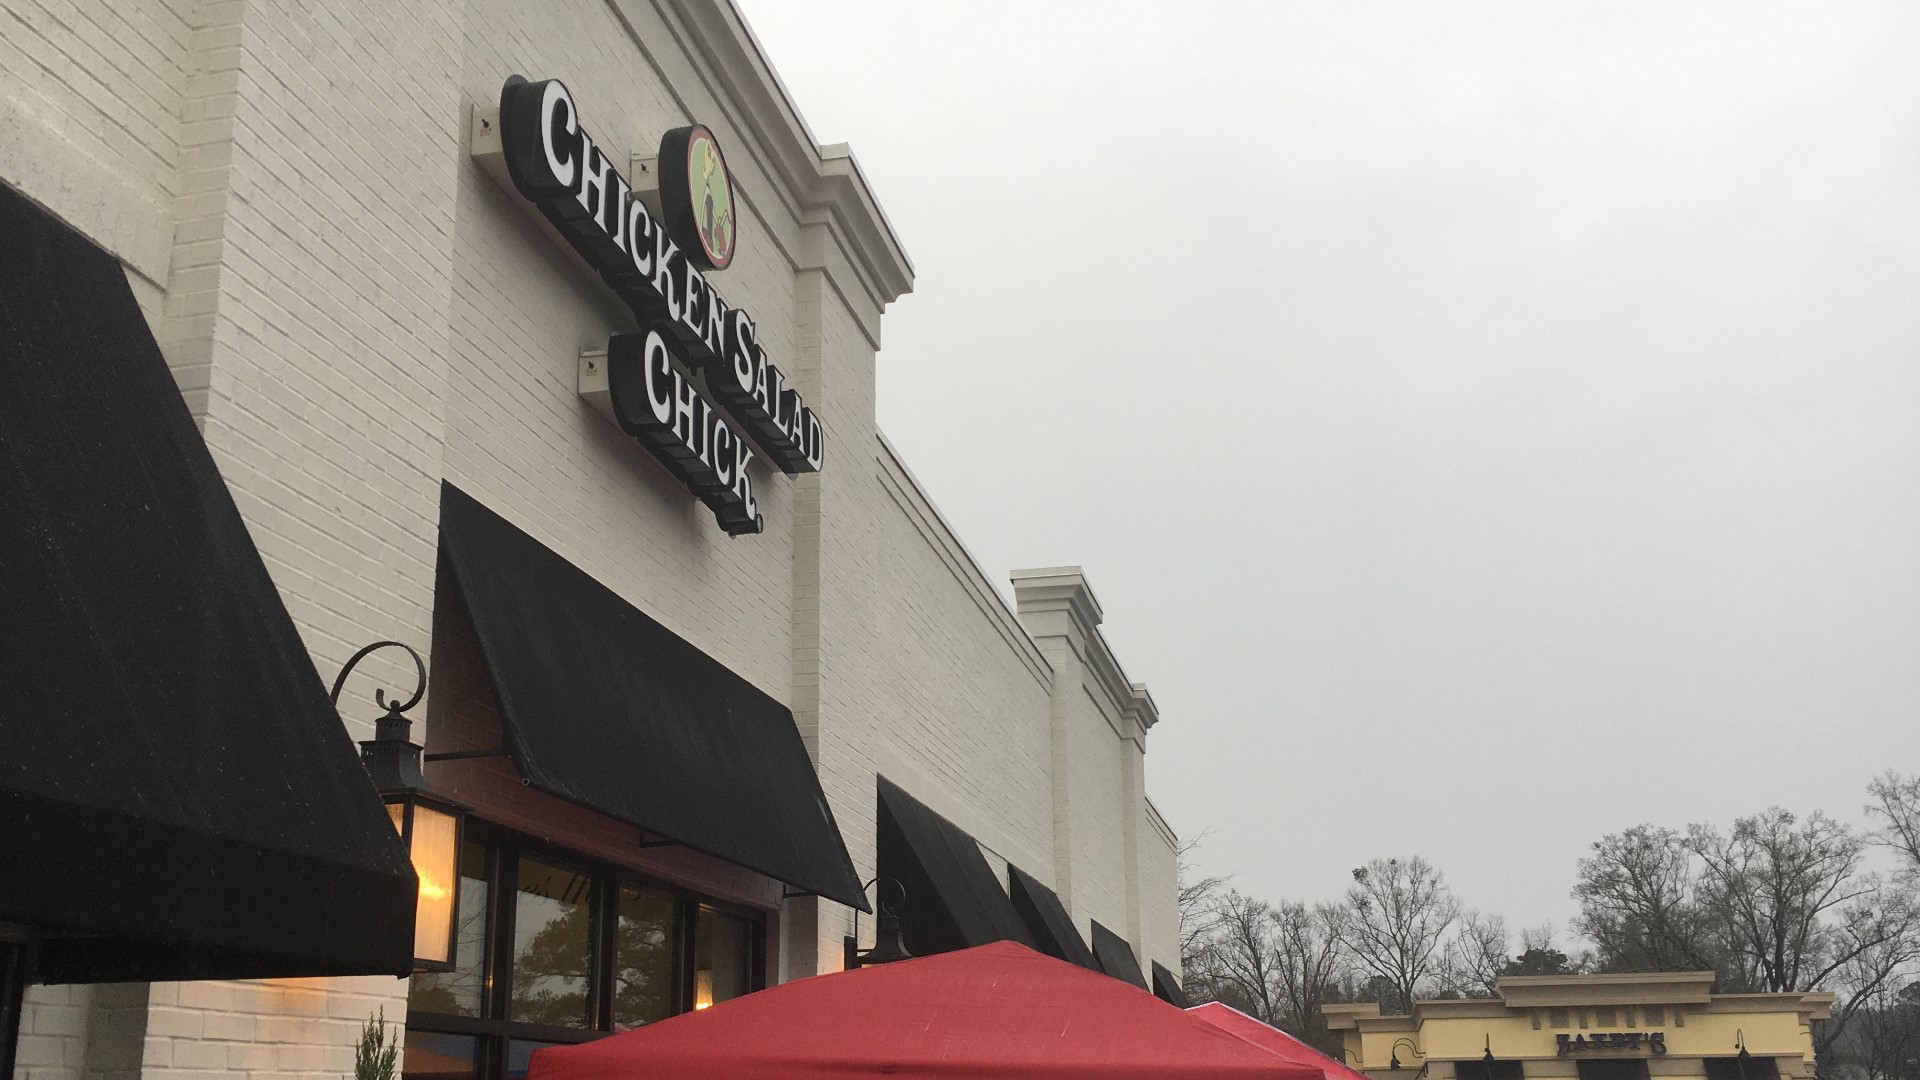 Chicken Salad Chick officially opens Wednesday in Macon, and the restaurant has planned four days of giveaways to celebrate.